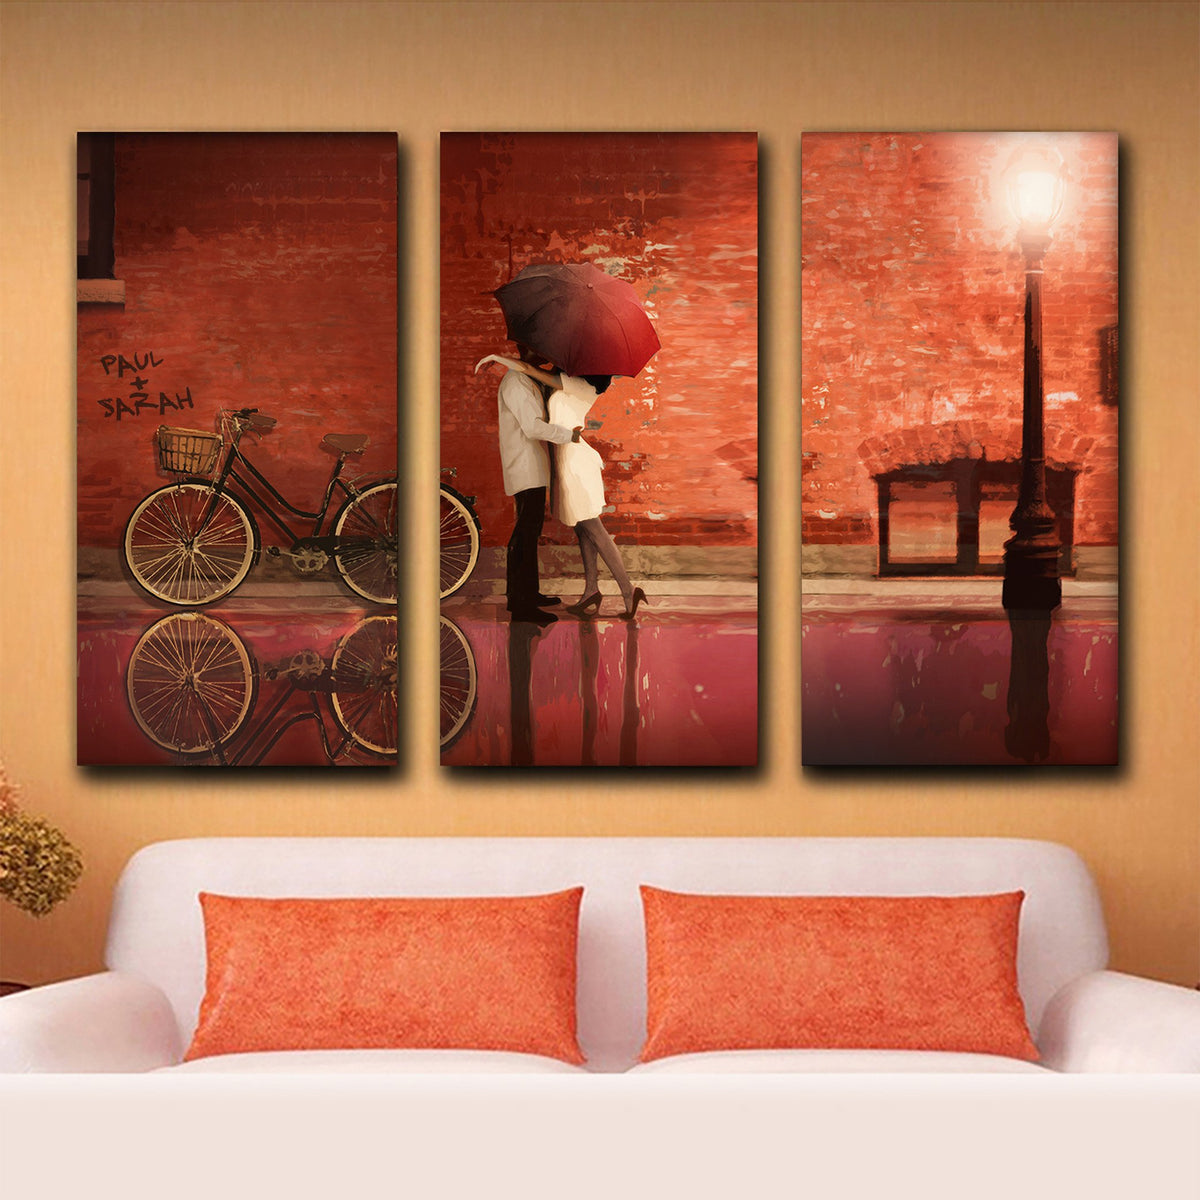 Three XXL canvas art panels make up this personalized art with red brick wall and couple kissing - Personal-Prints